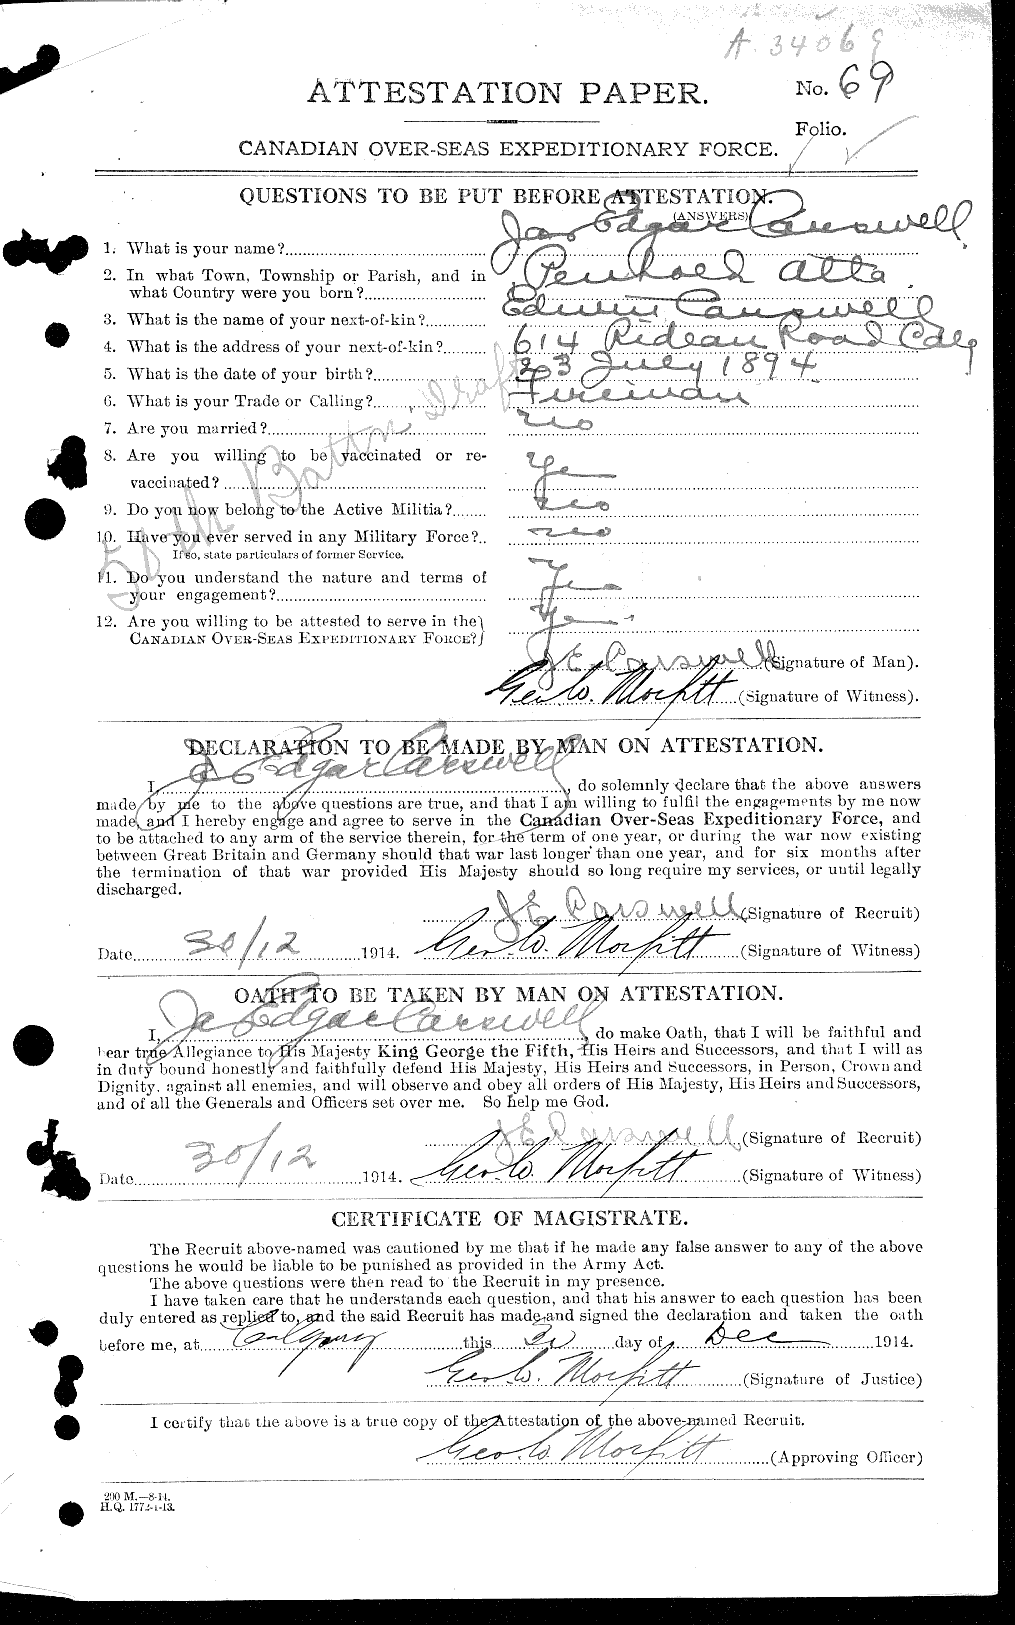 Personnel Records of the First World War - CEF 011526a